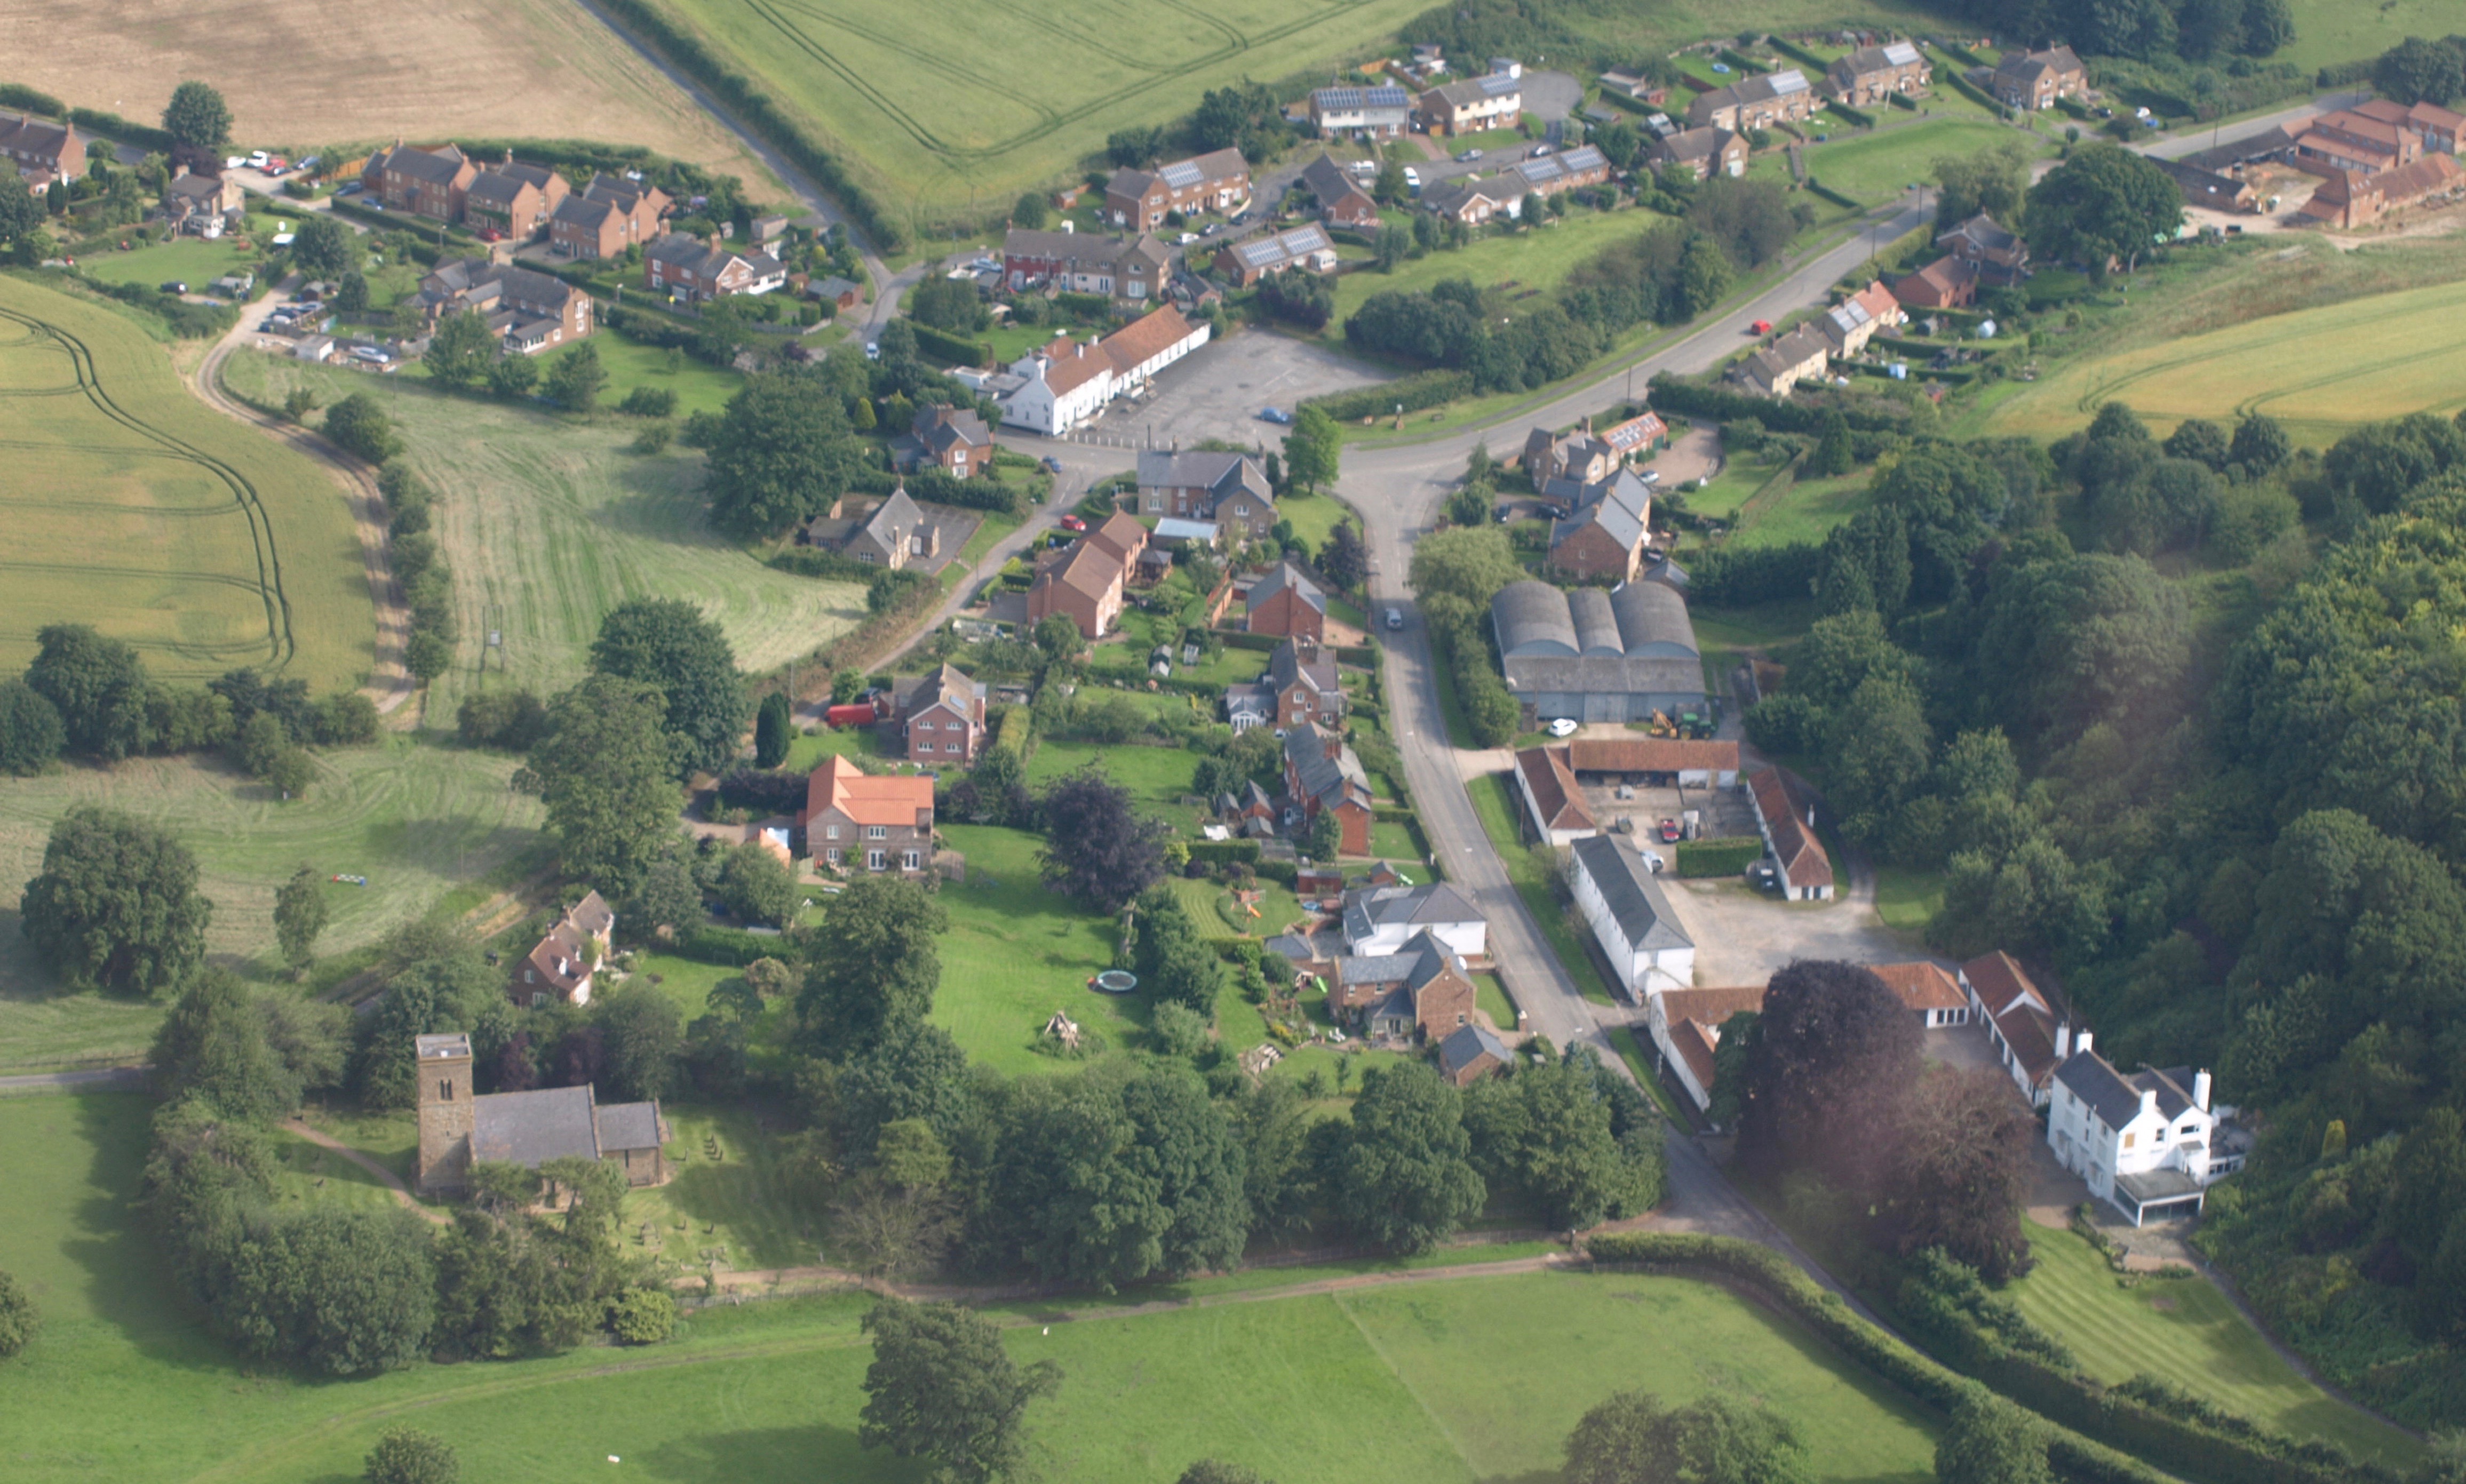 An aerial view of Rothwell village